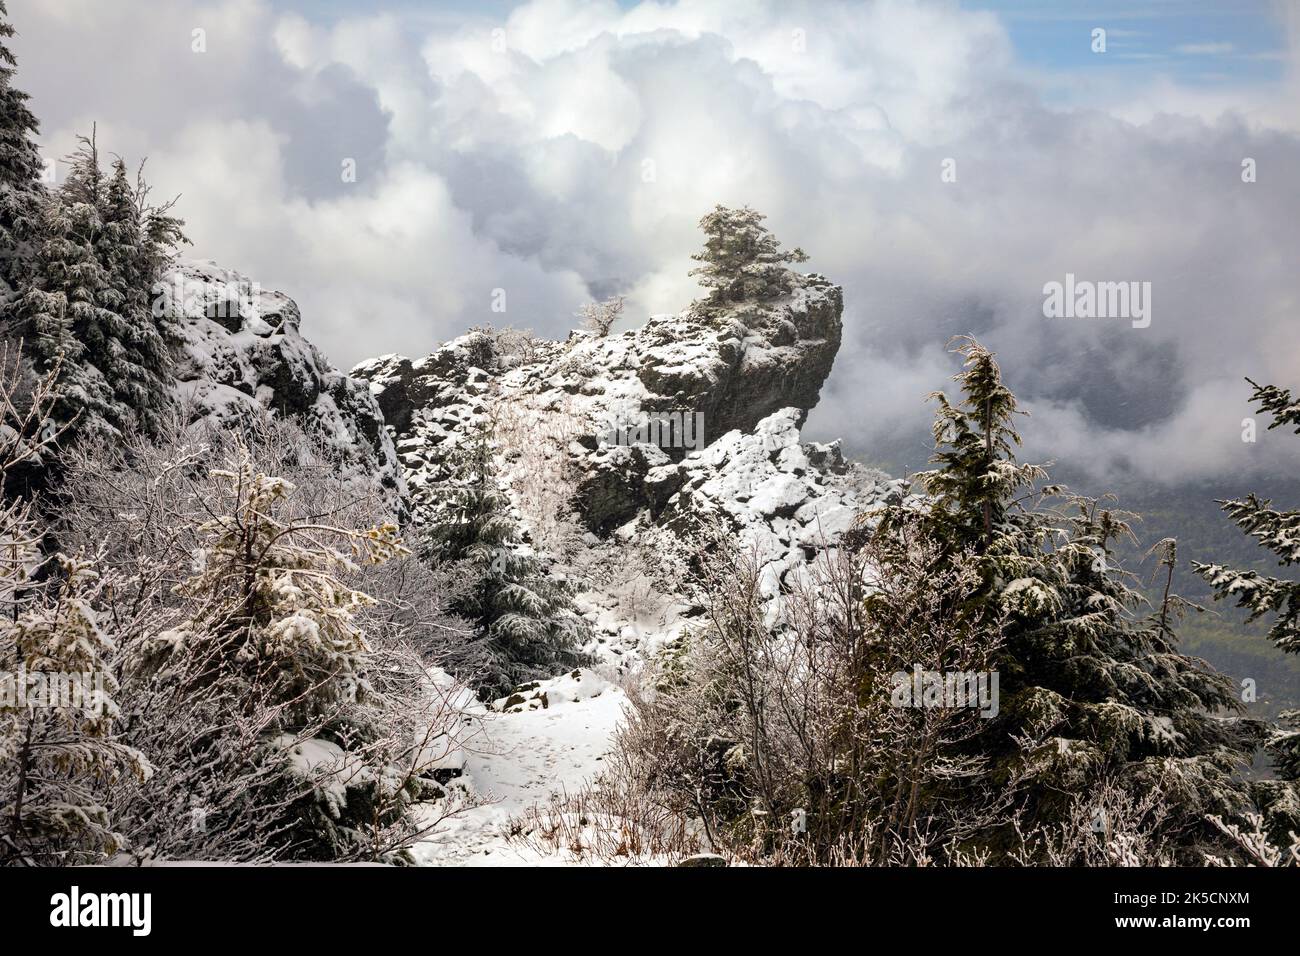 WA22170-00...WASHINGTON - Breaking Clouds during a Snow Storm near the Summit of Mount Si near North Bend. Stockfoto